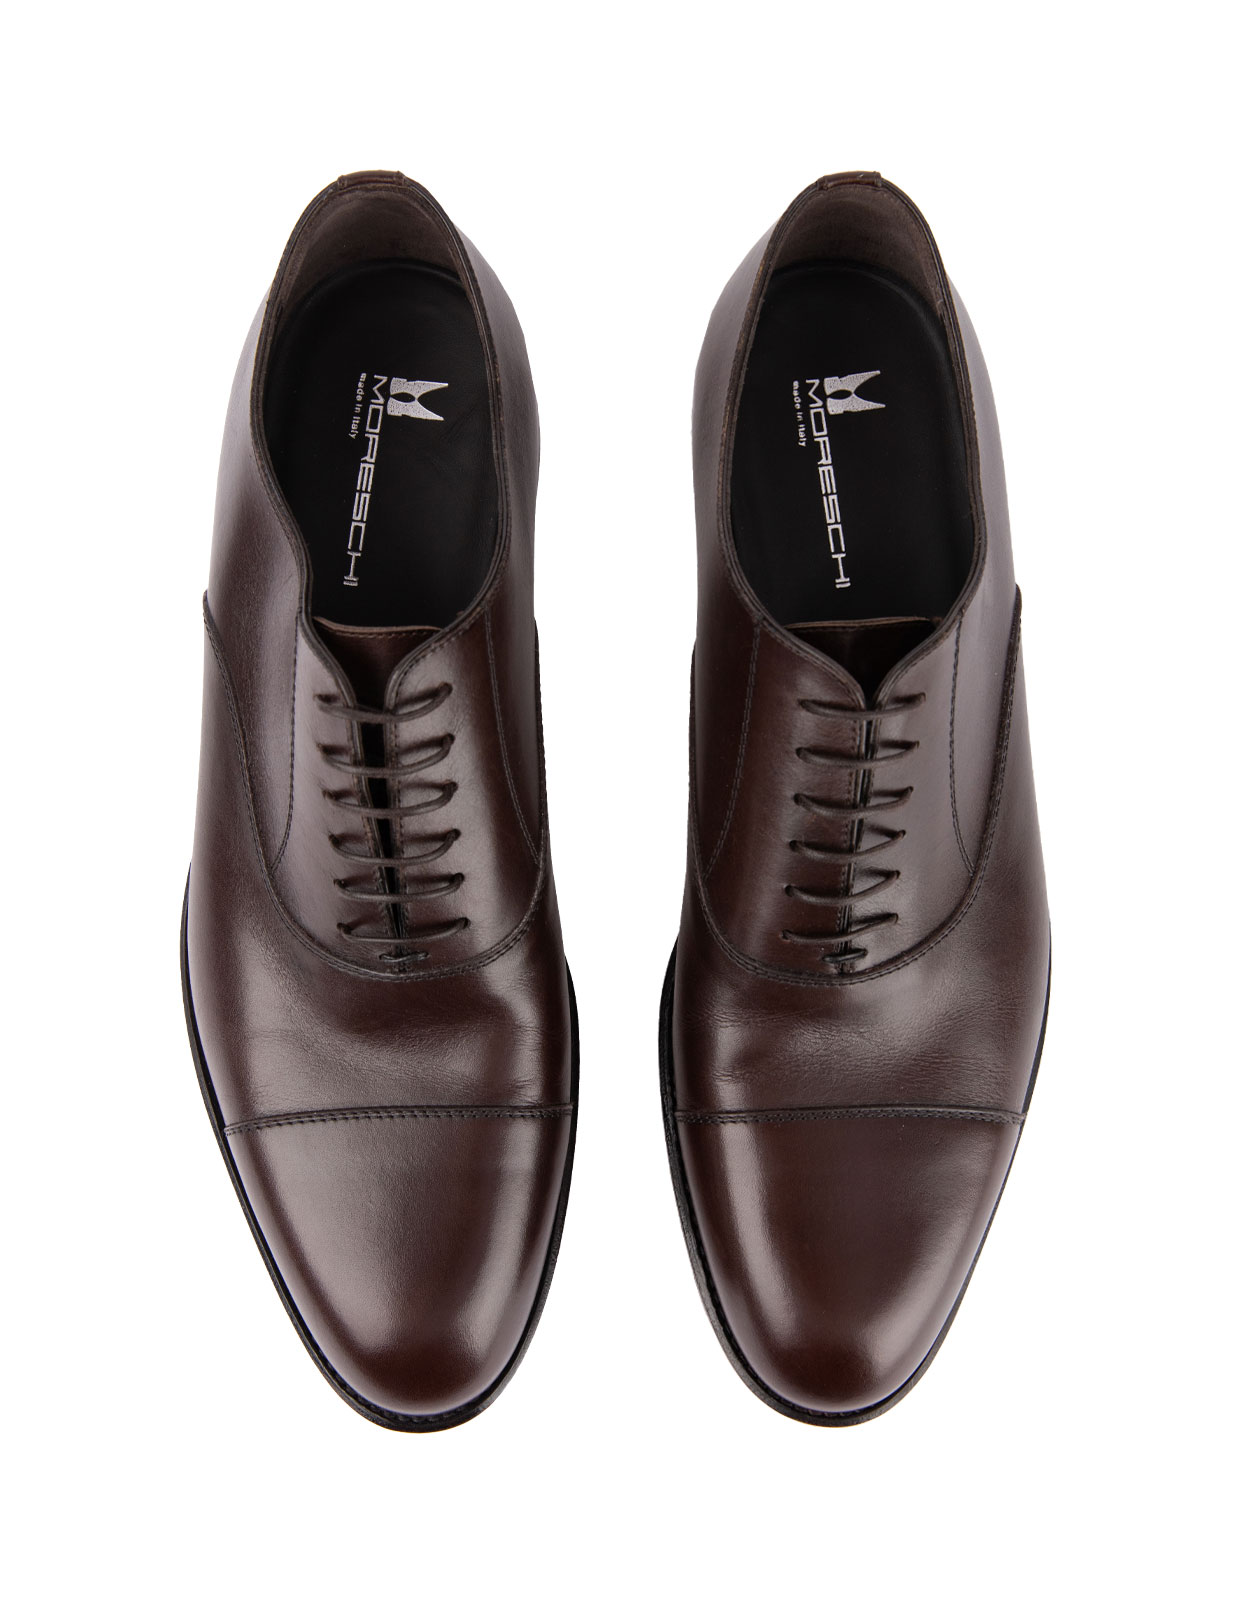 Cleveland Oxford Shoes Brown Stl 9